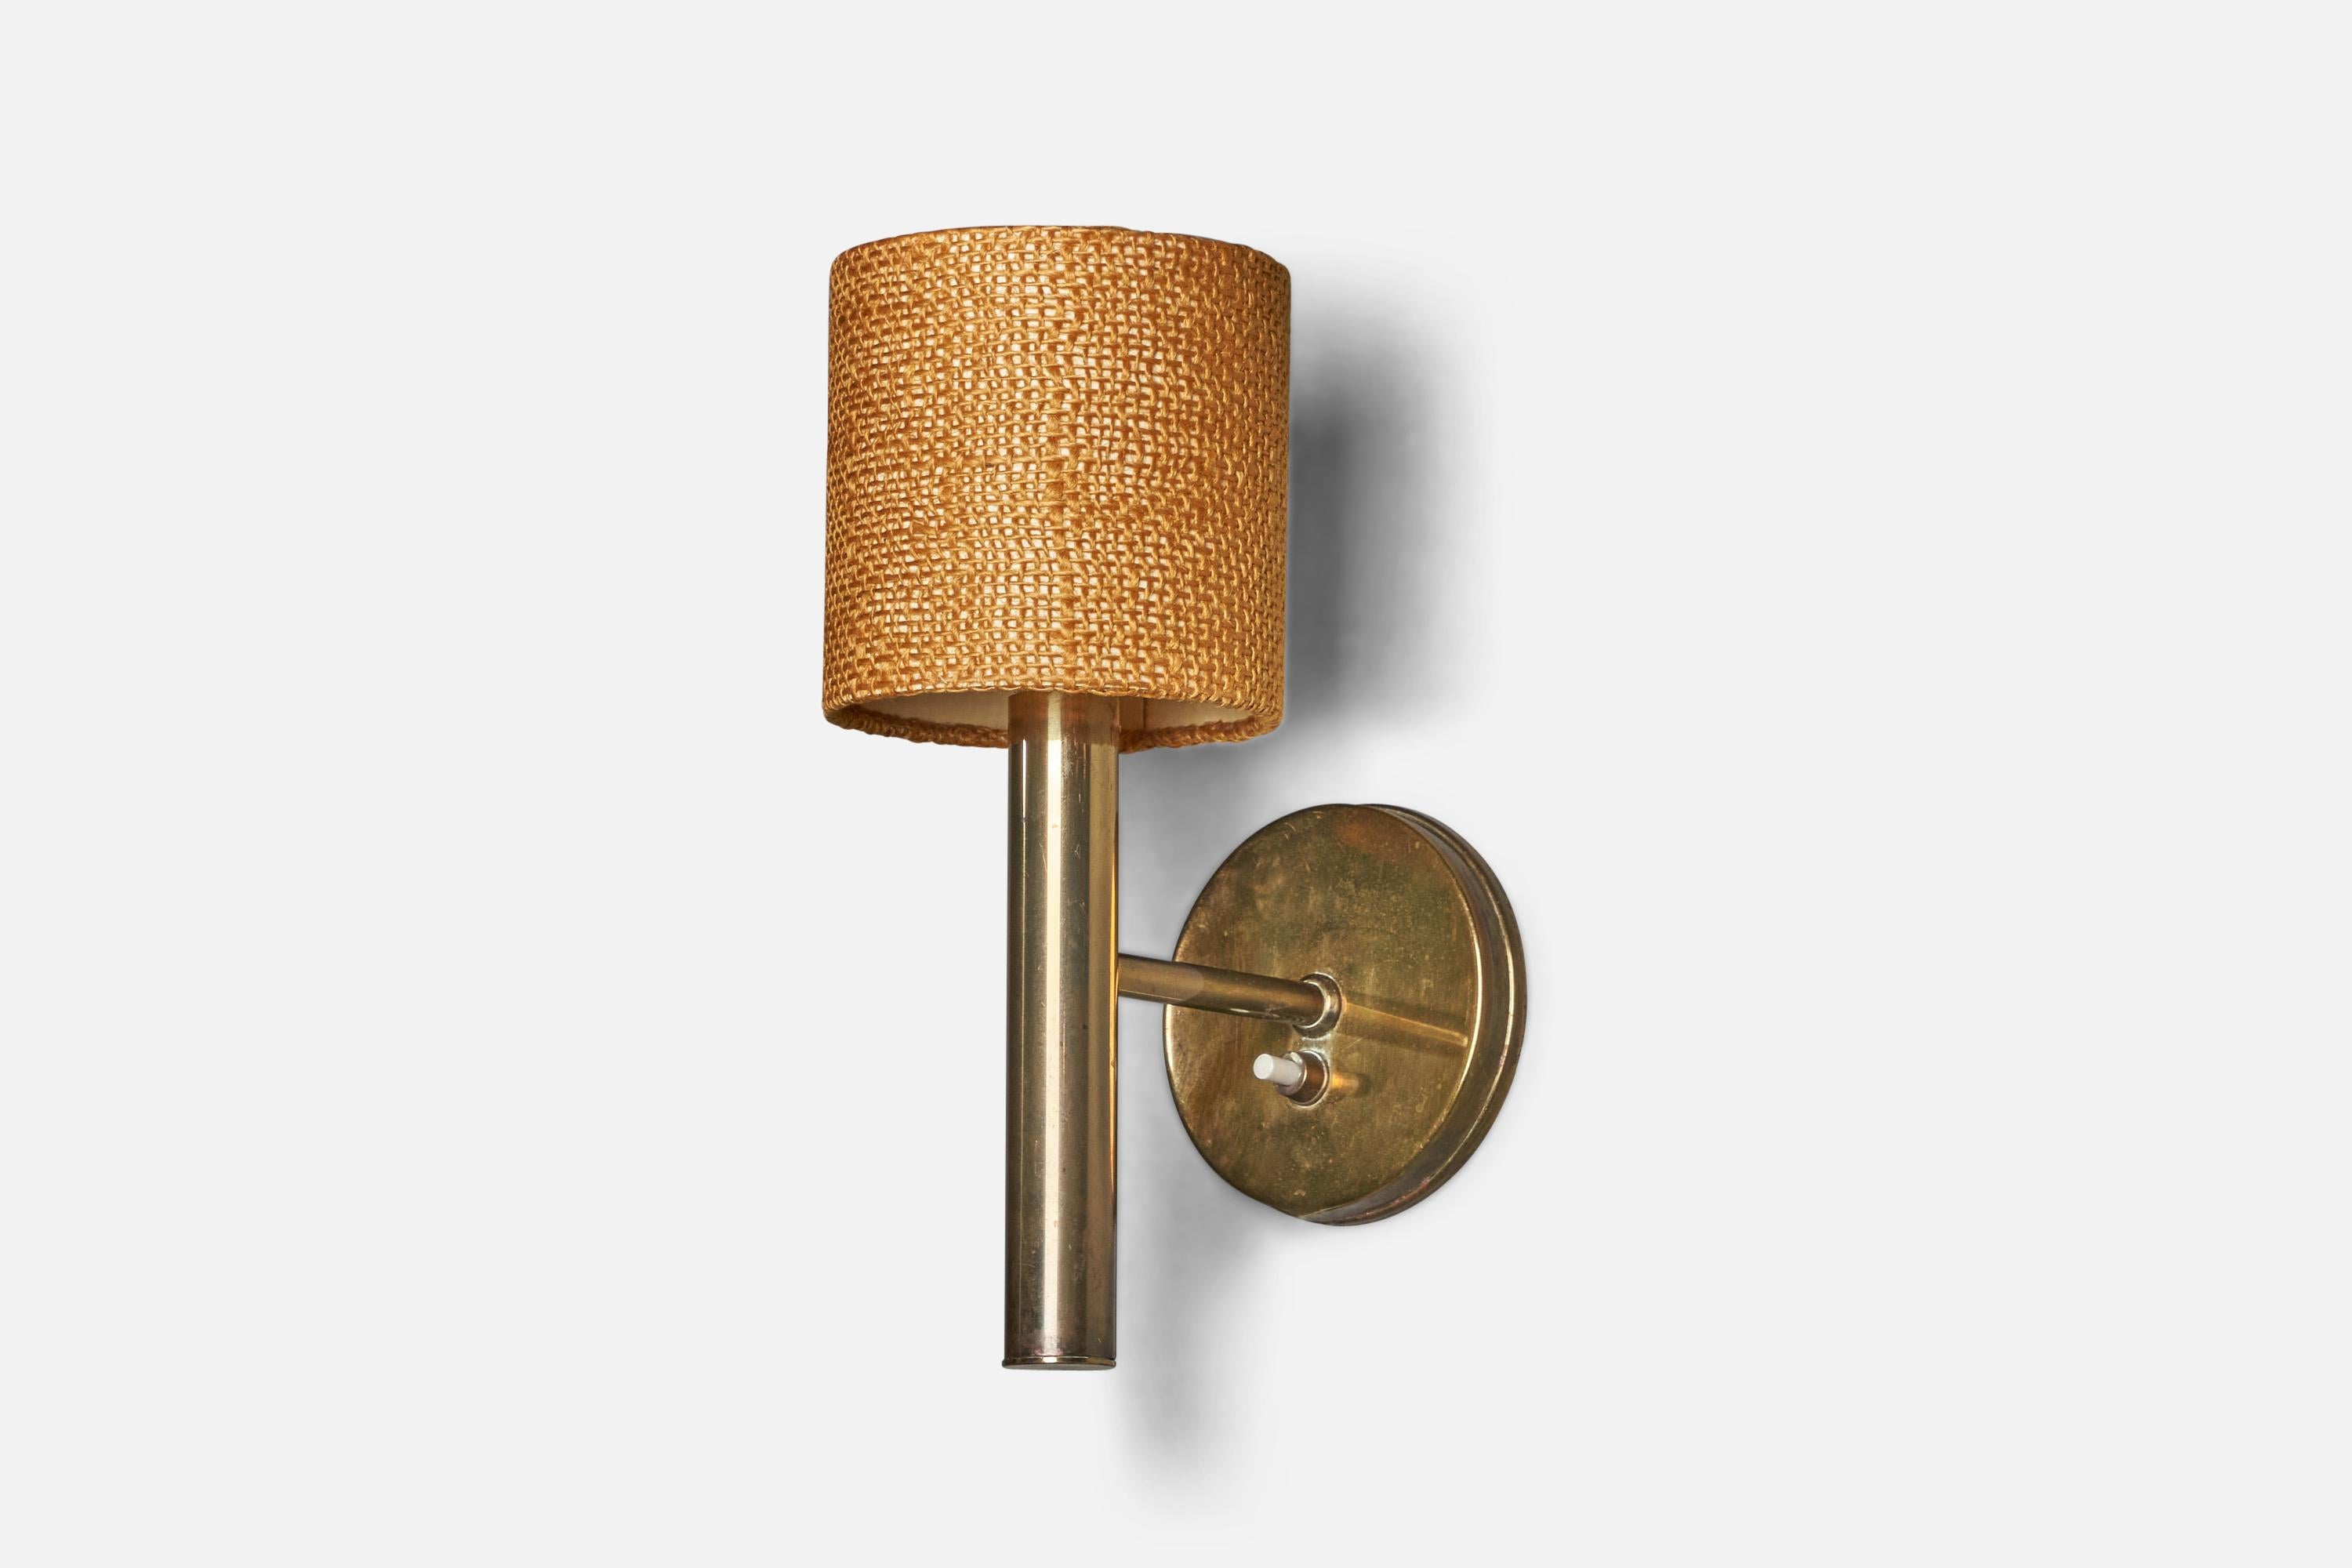 A brass and woven orange beige fabric wall light designed by Svend Mejlstrøm and produced by MS Belysning, Norway, 1960s.

Overall Dimensions (inches): 9.75” H x 3.75” W x 6” D
Back Plate Dimensions (inches): 3.9” Diameter
Bulb Specifications: E-14